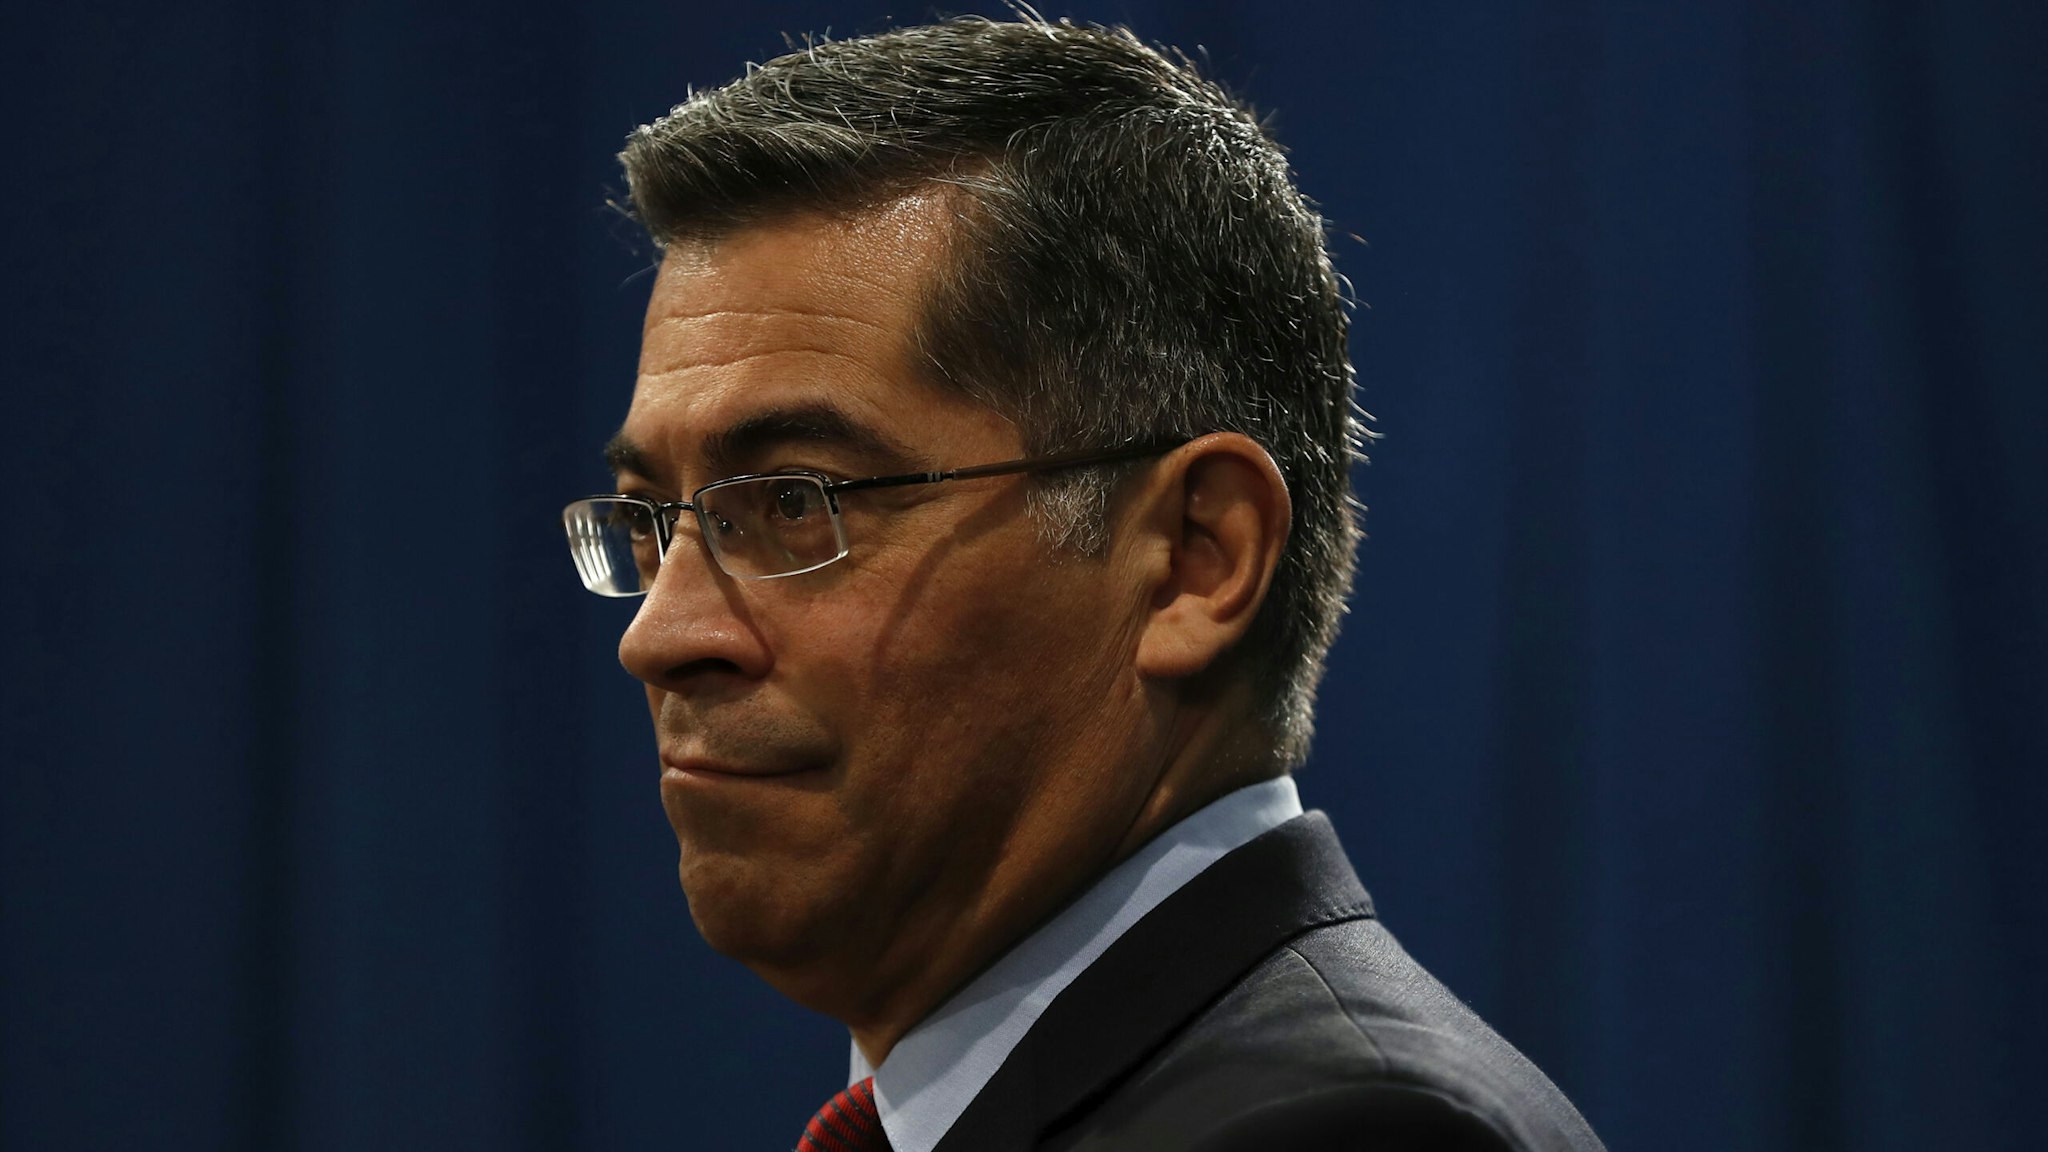 SACRAMENTO, CA - MARCH 07: California Attorney General Xavier Becerra reacts during a press conference at the California State Capitol on March 7, 2018 in Sacramento, California. The press conference came in response to an earlier by U.S. Attorney General Jeff Sessions at a nearby hotel and the Justice Department's decision to sue the State of California over its controversial sanctuary policies for undocumented immigrants.